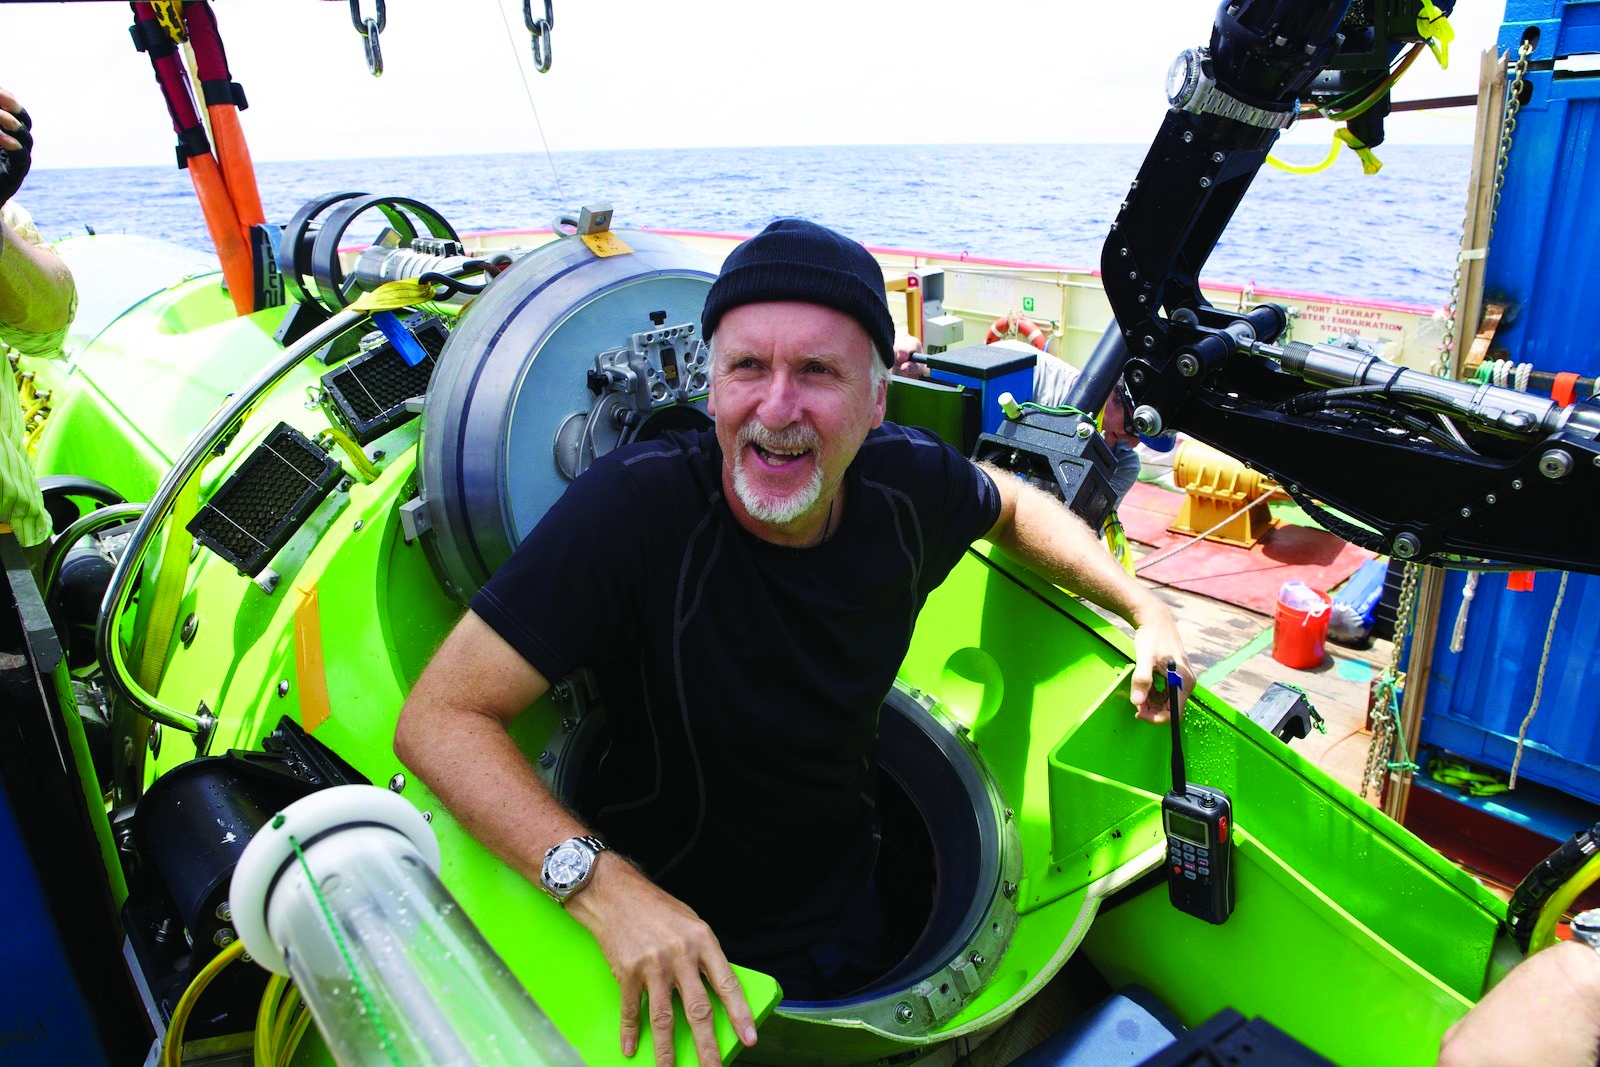 James Cameron emerges from the DEEPSEA CHALLENGER submersible after his successful solo dive to the Mariana Trench, the deepest part of the ocean.